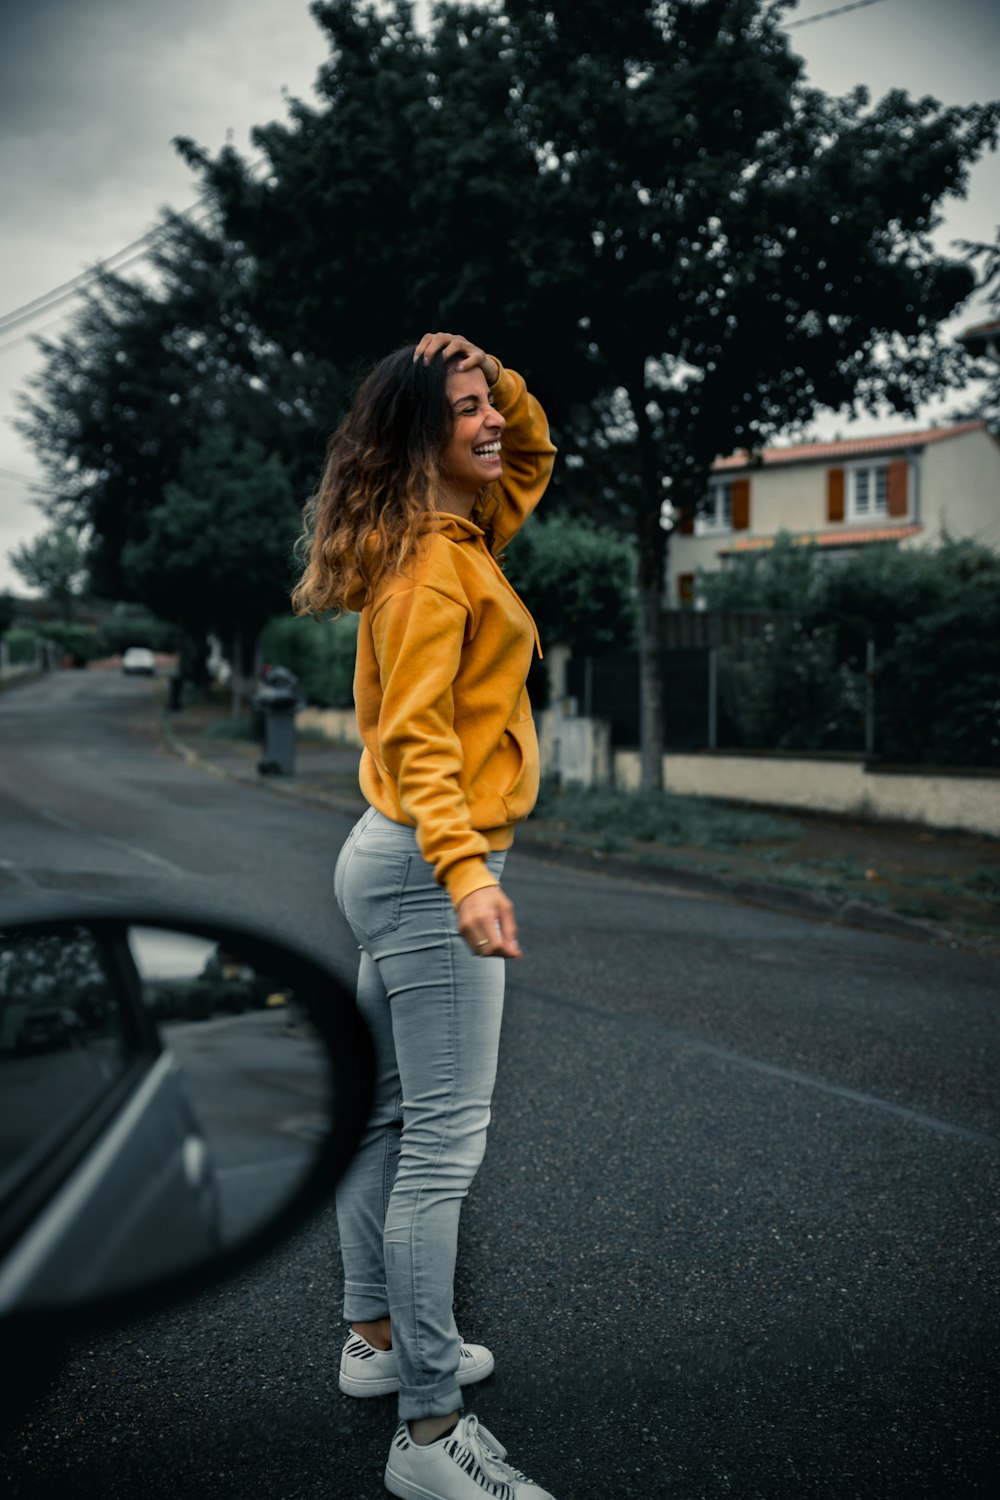 Woman in yellow hoodie and gray pants standing on road during daytime photo  – Free Woman in the middle of the street Image on Unsplash